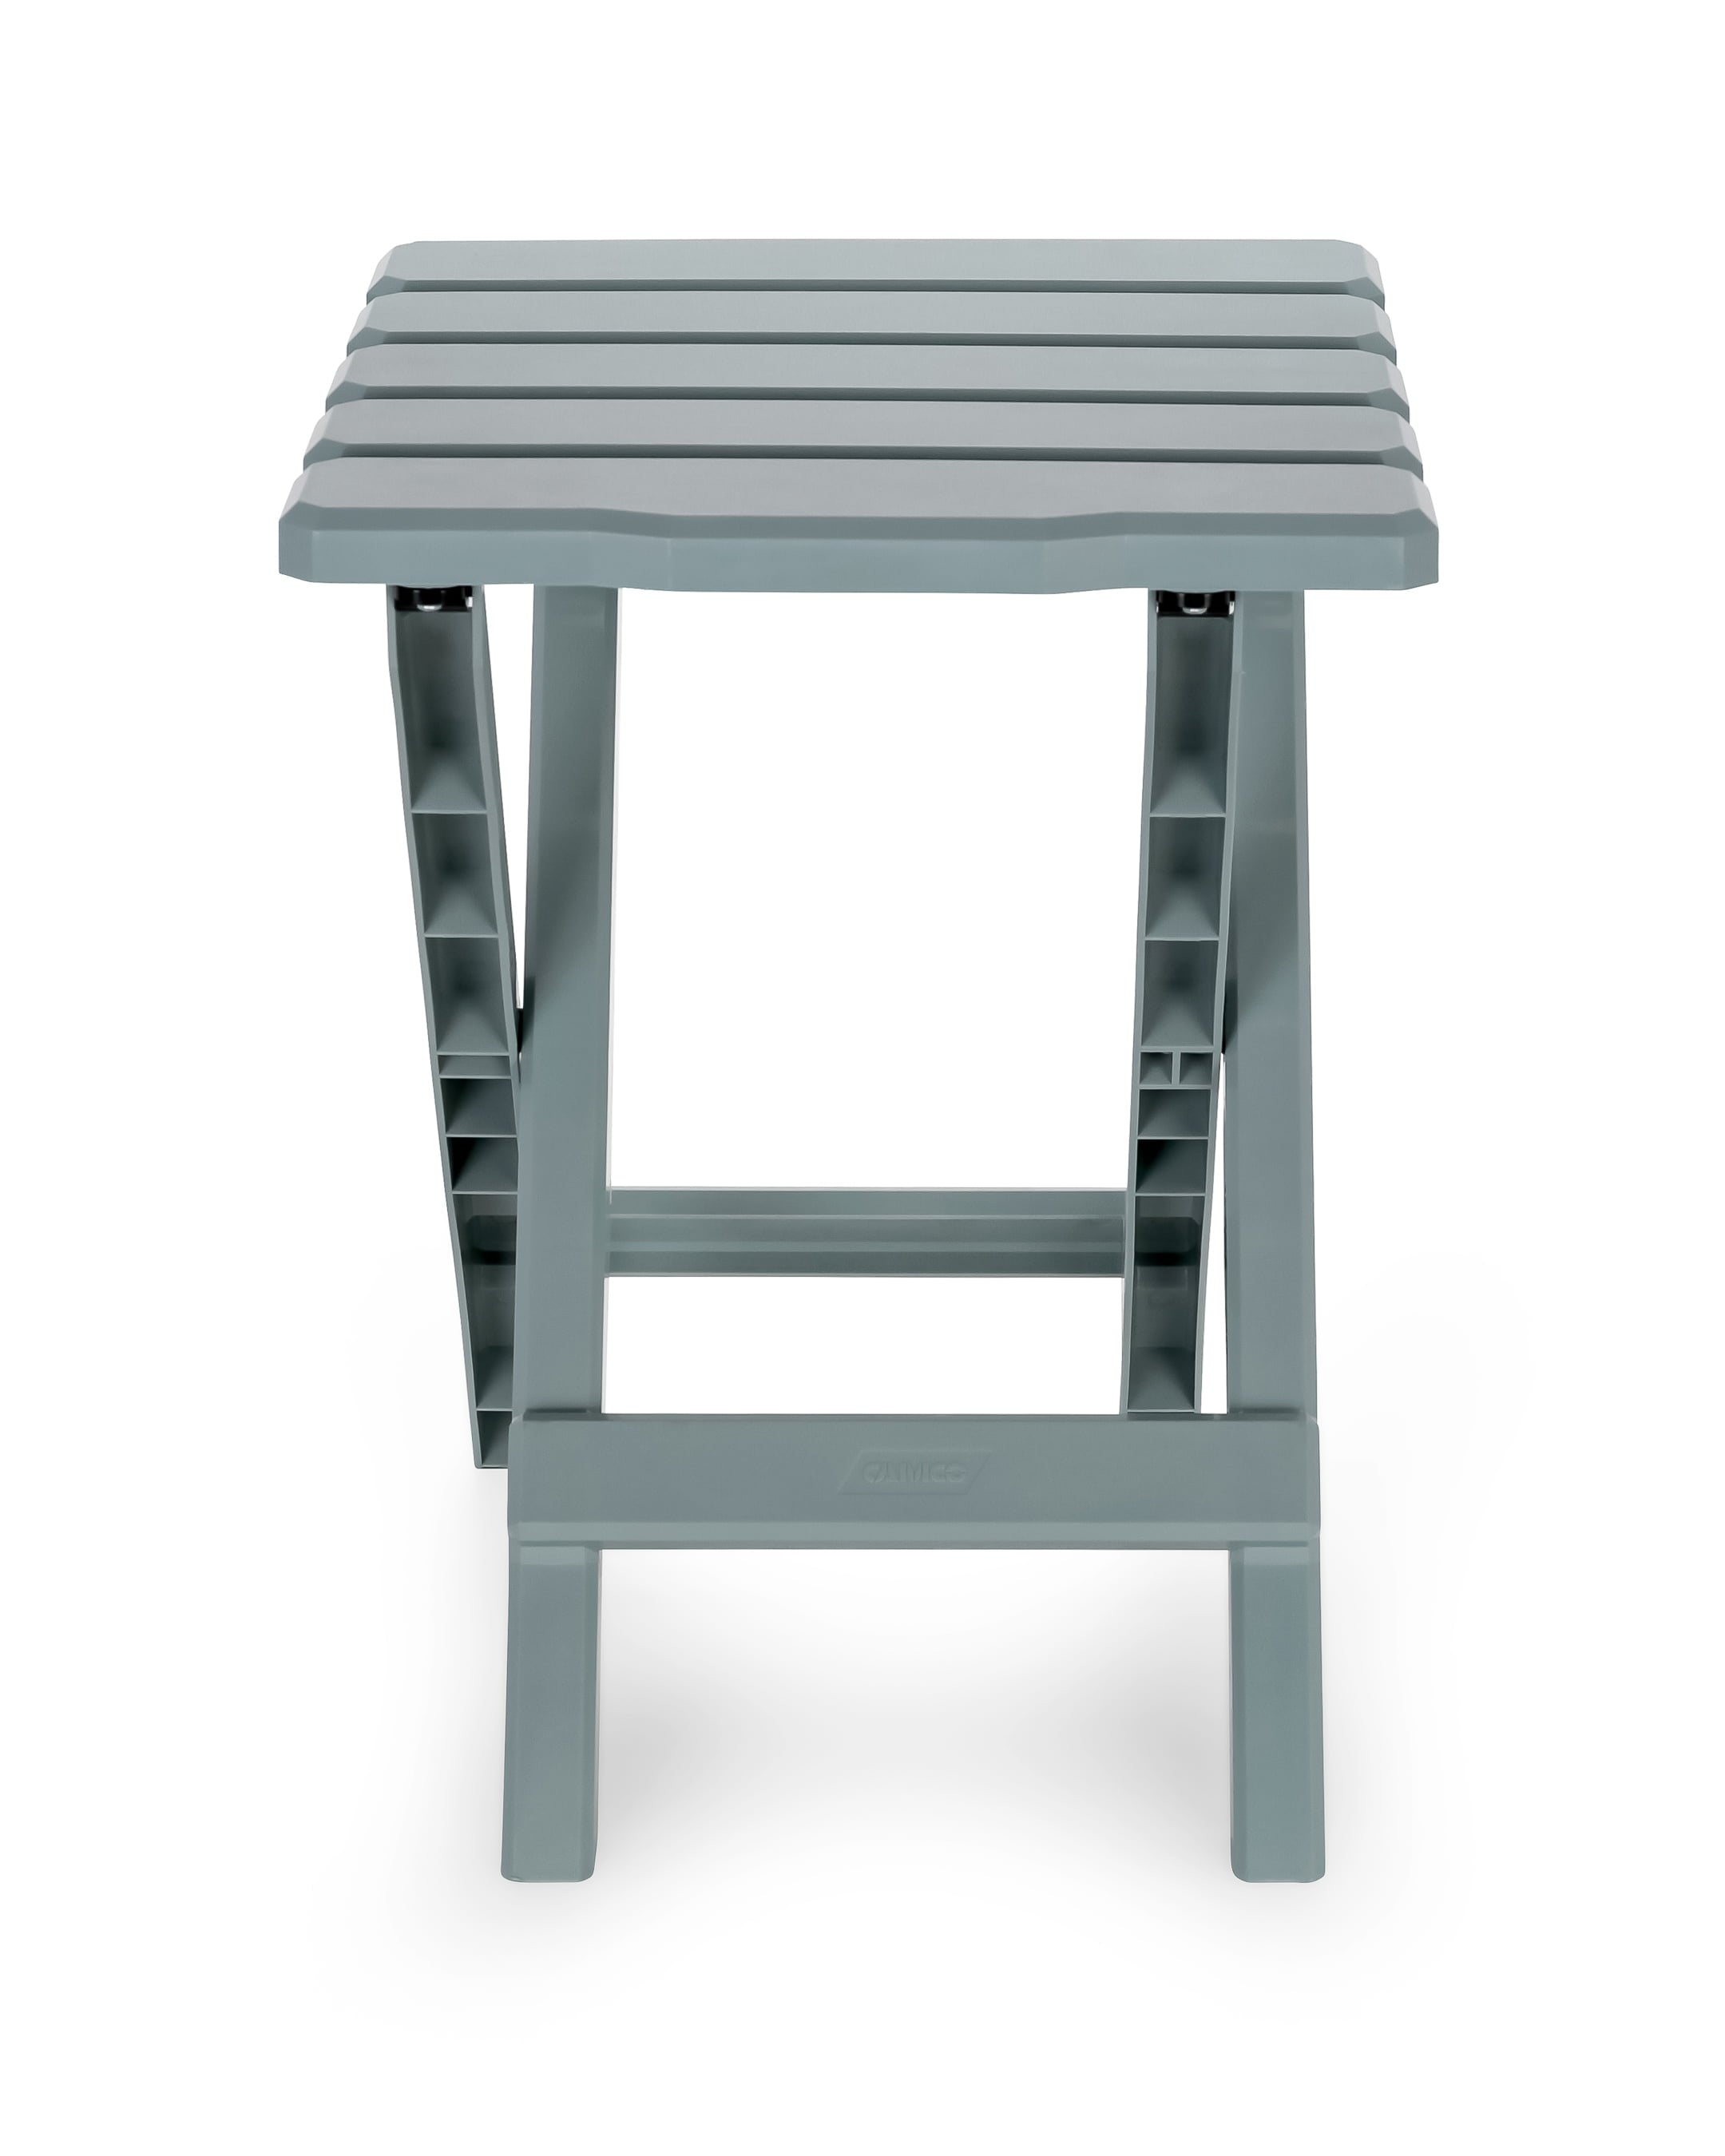 Camco Large Adirondack Outdoor Table， Perfect for the Beach， Camping， Picnics， and Cookouts，18